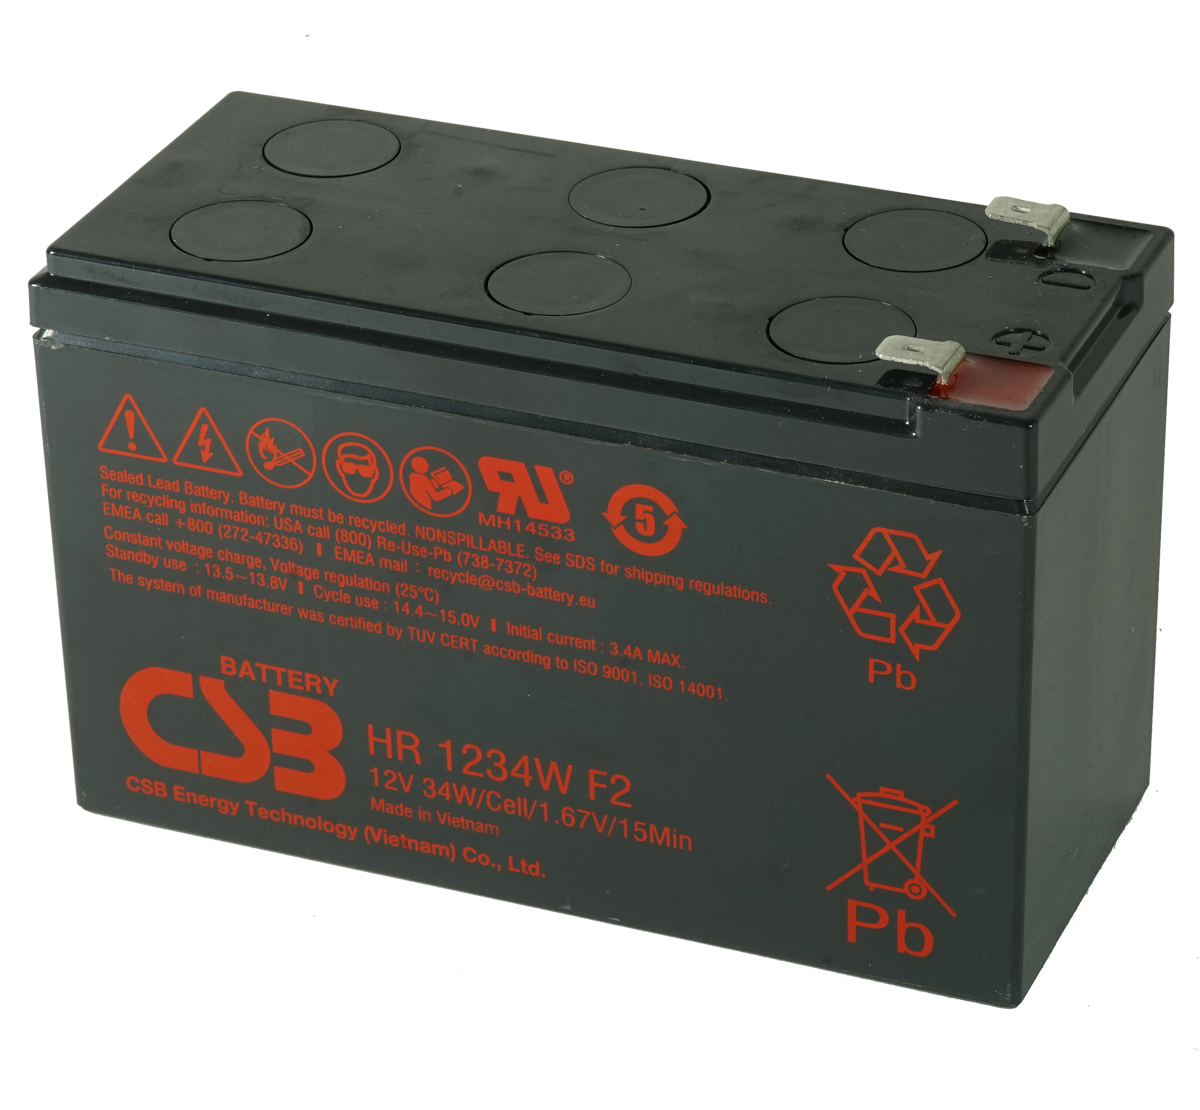 MDS2551 UPS Battery Kit for MGE AB2551